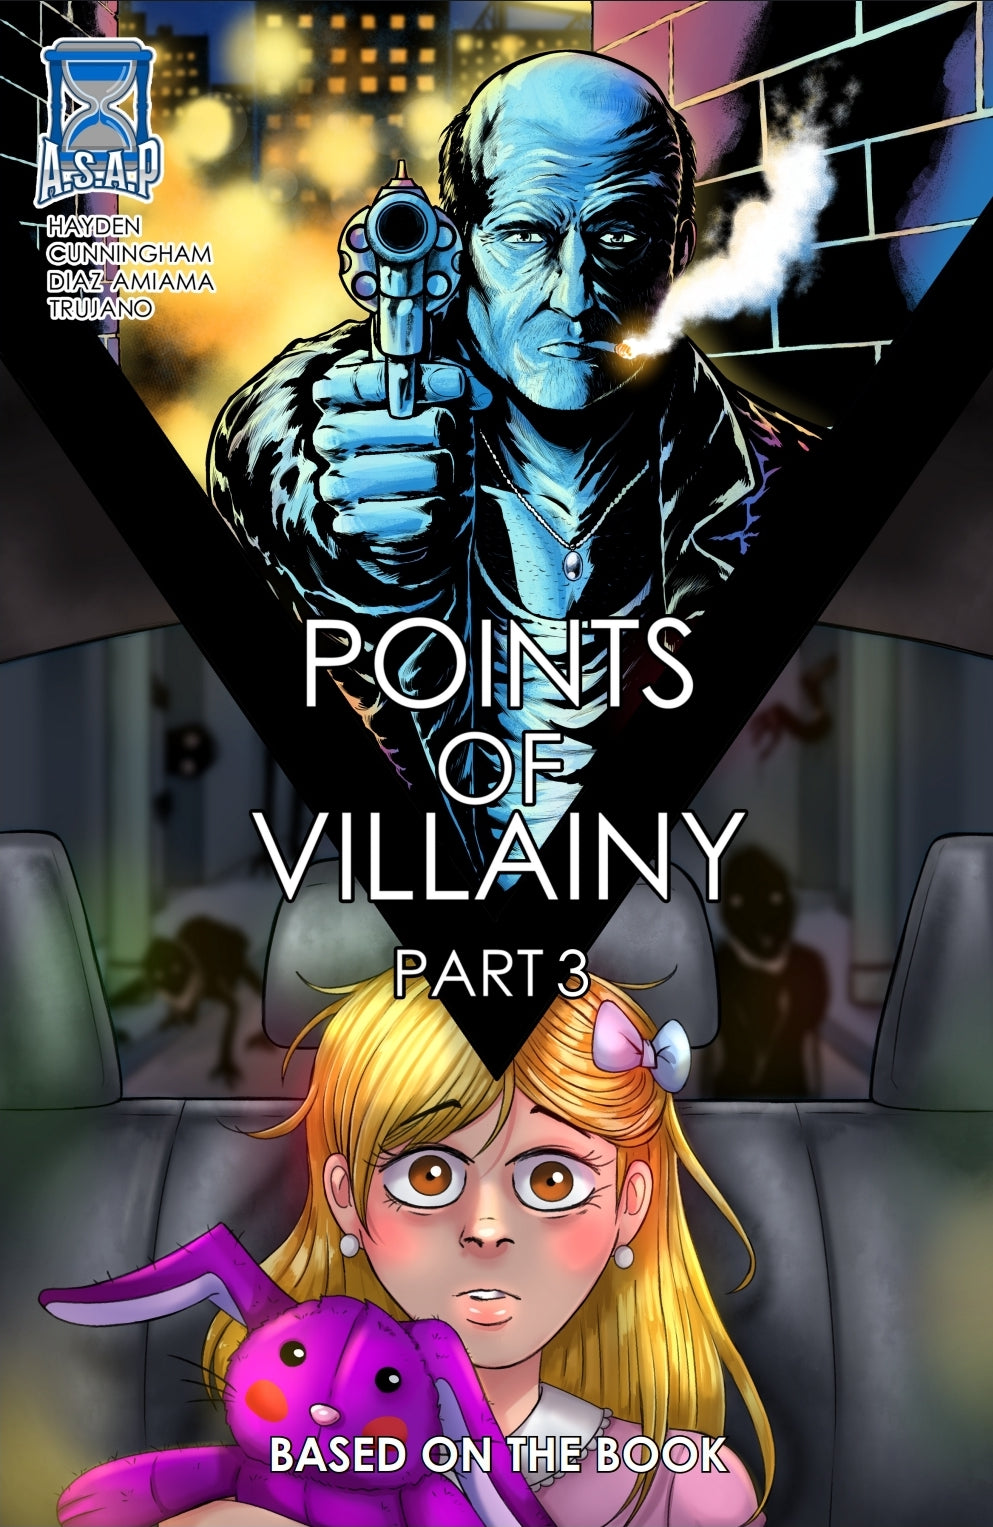 NOW AVAILABLE - Points of Villainy Part 3